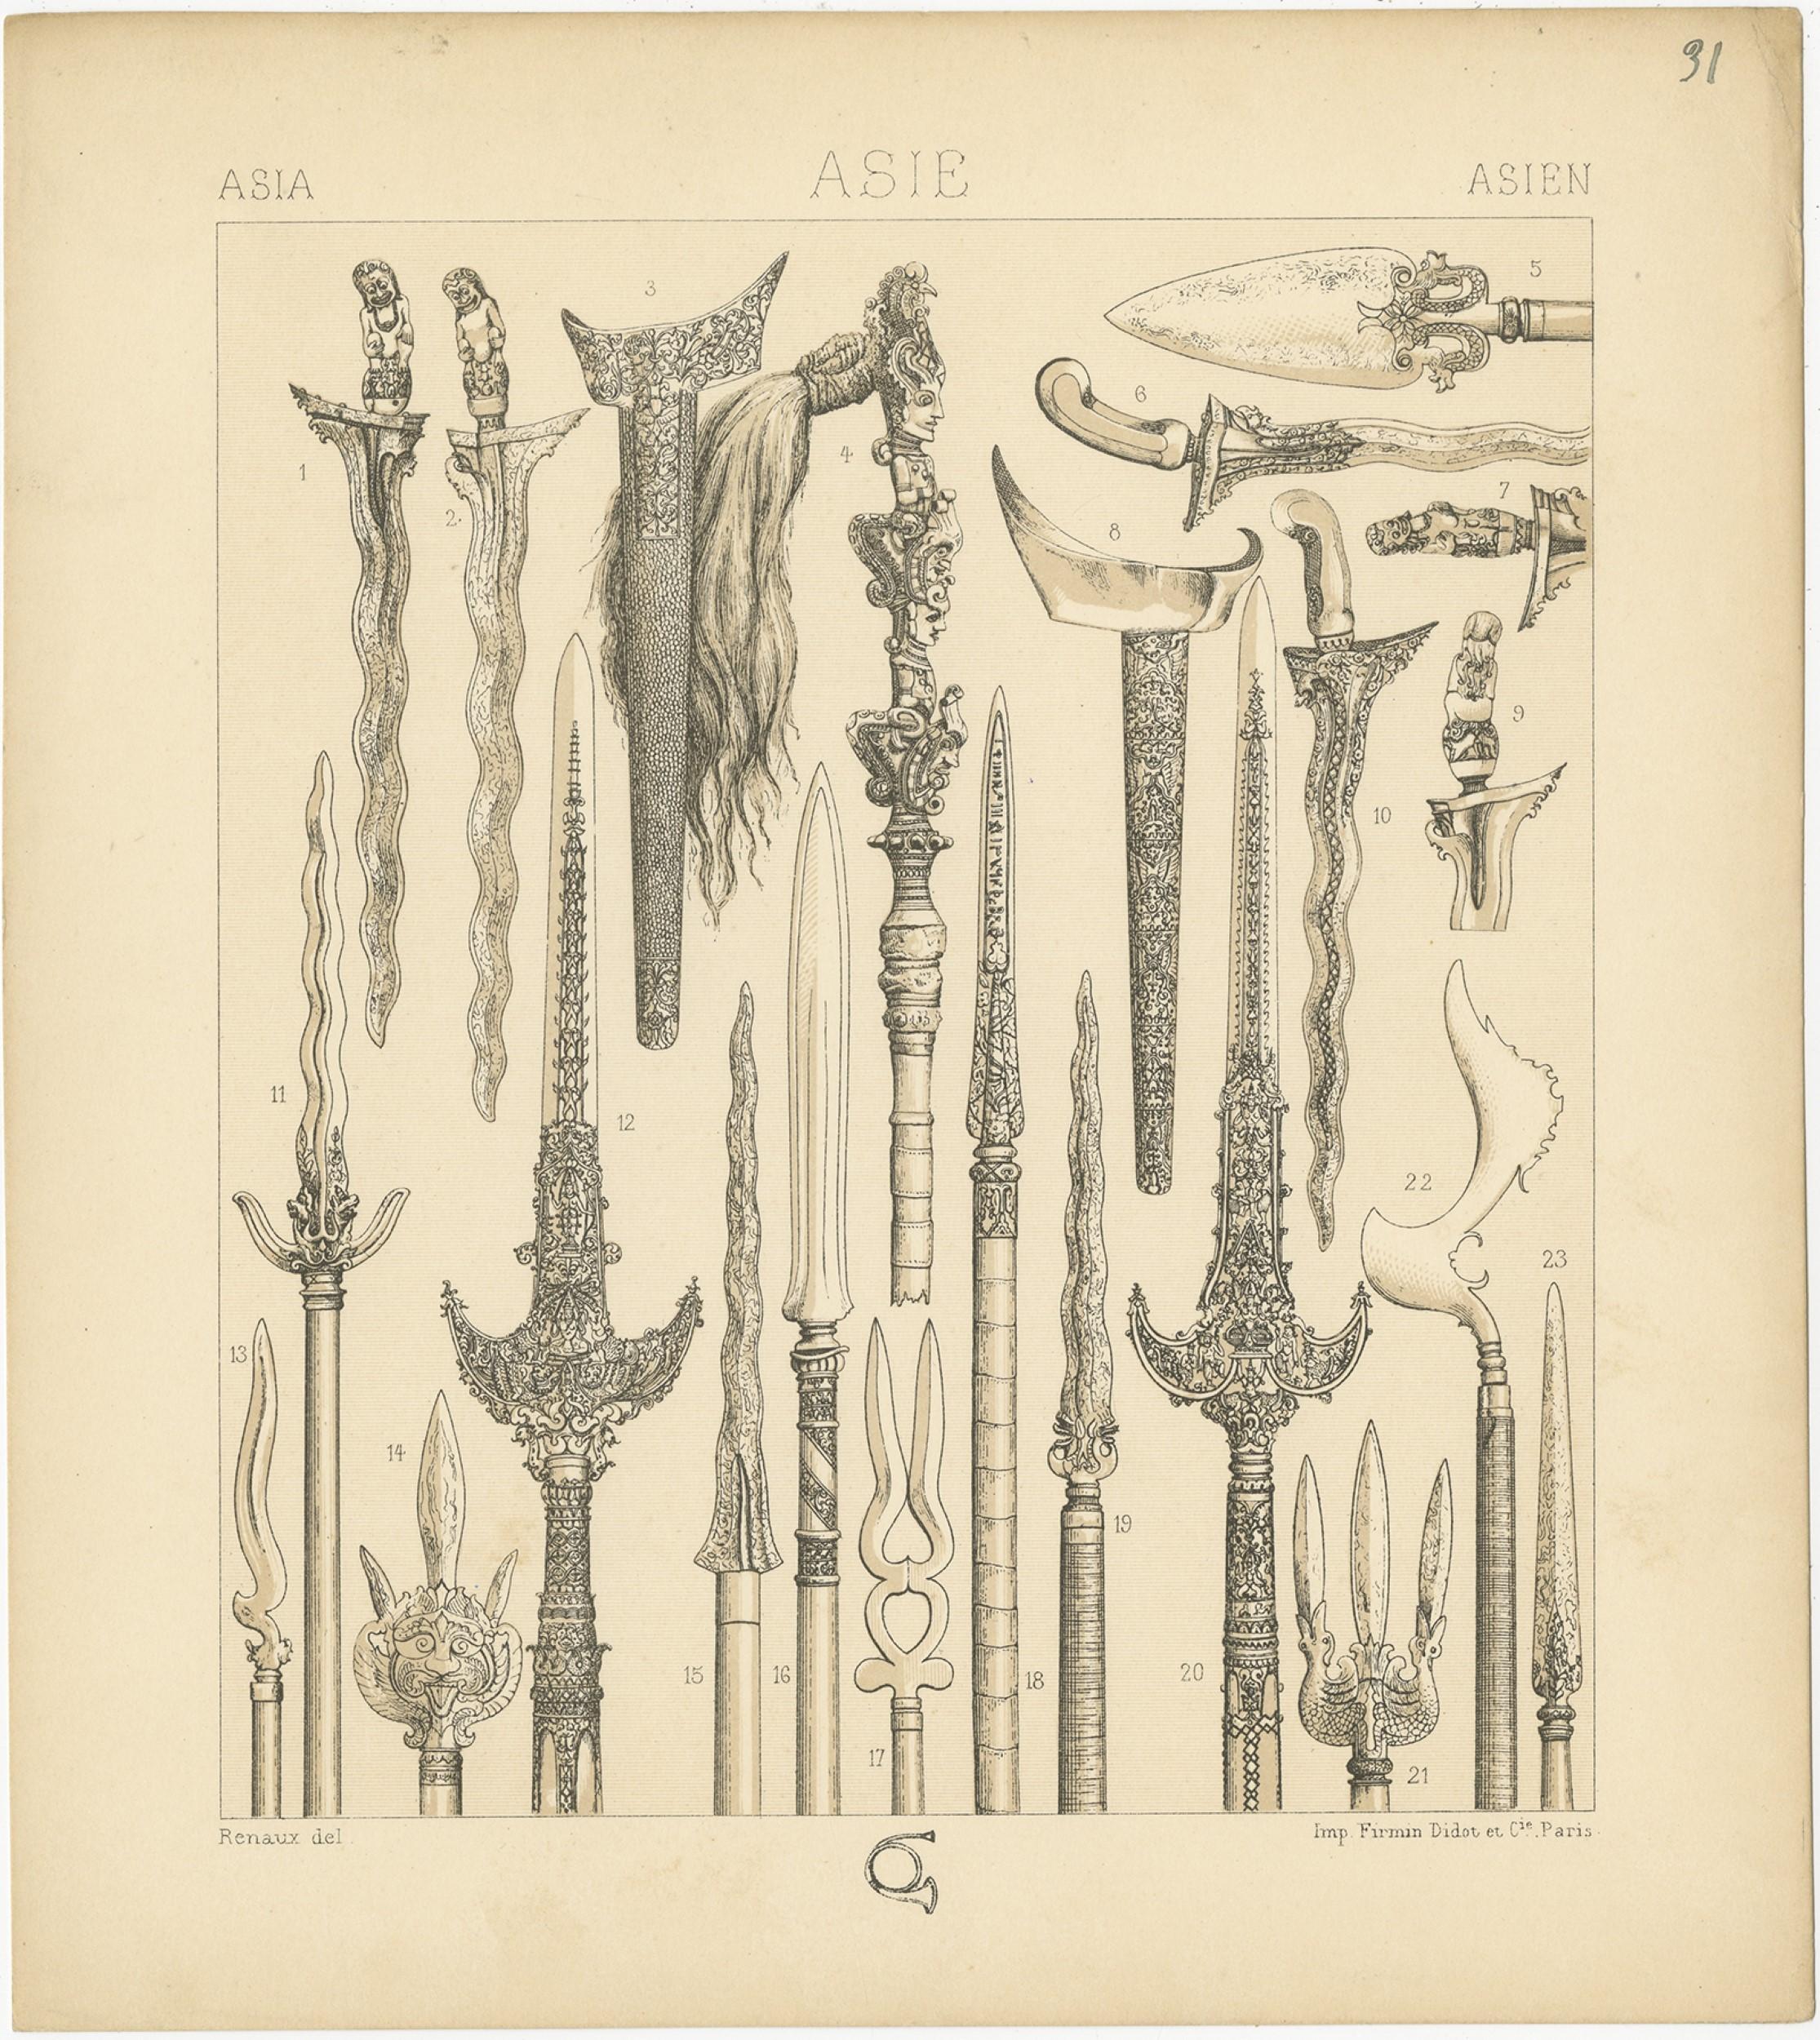 Antique print titled 'Asia - Asie - Asien'. Chromolithograph of Asian swords. This print originates from 'Le Costume Historique' by M.A. Racinet. Published, circa 1880.